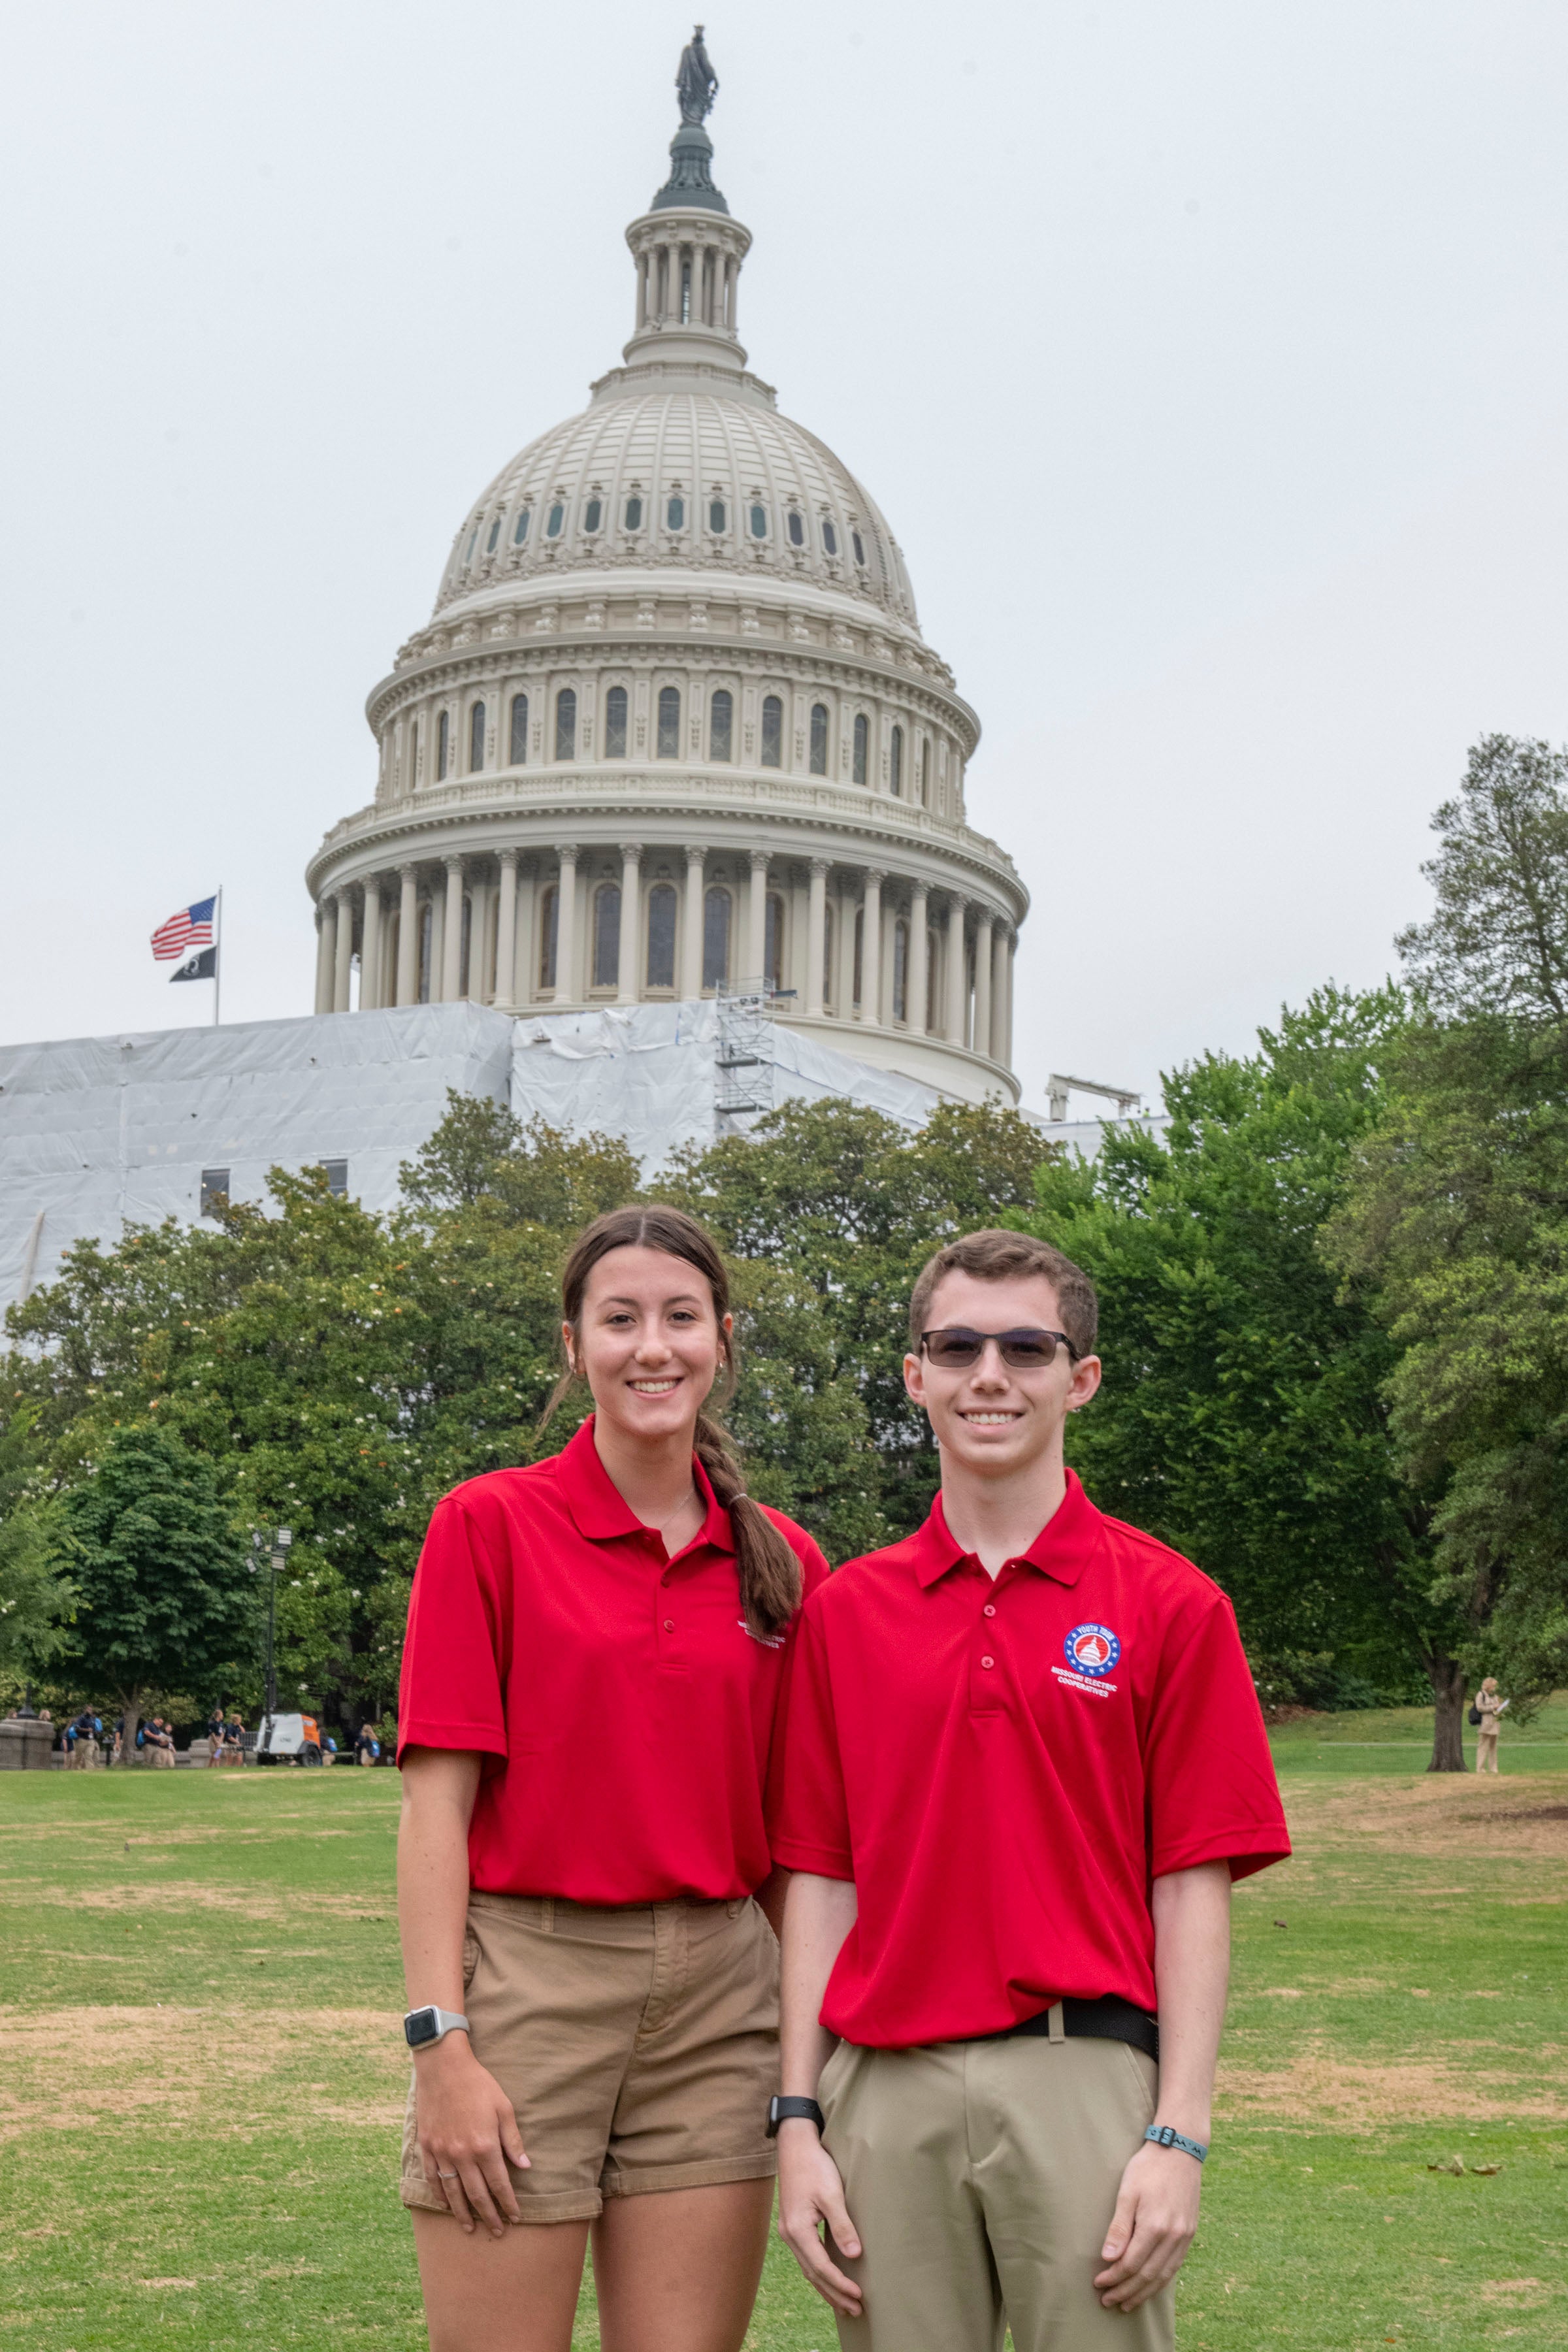 Congratulations to the  2023 Youth Tour Delegates, Chloe Billups and Cade Claycomb!